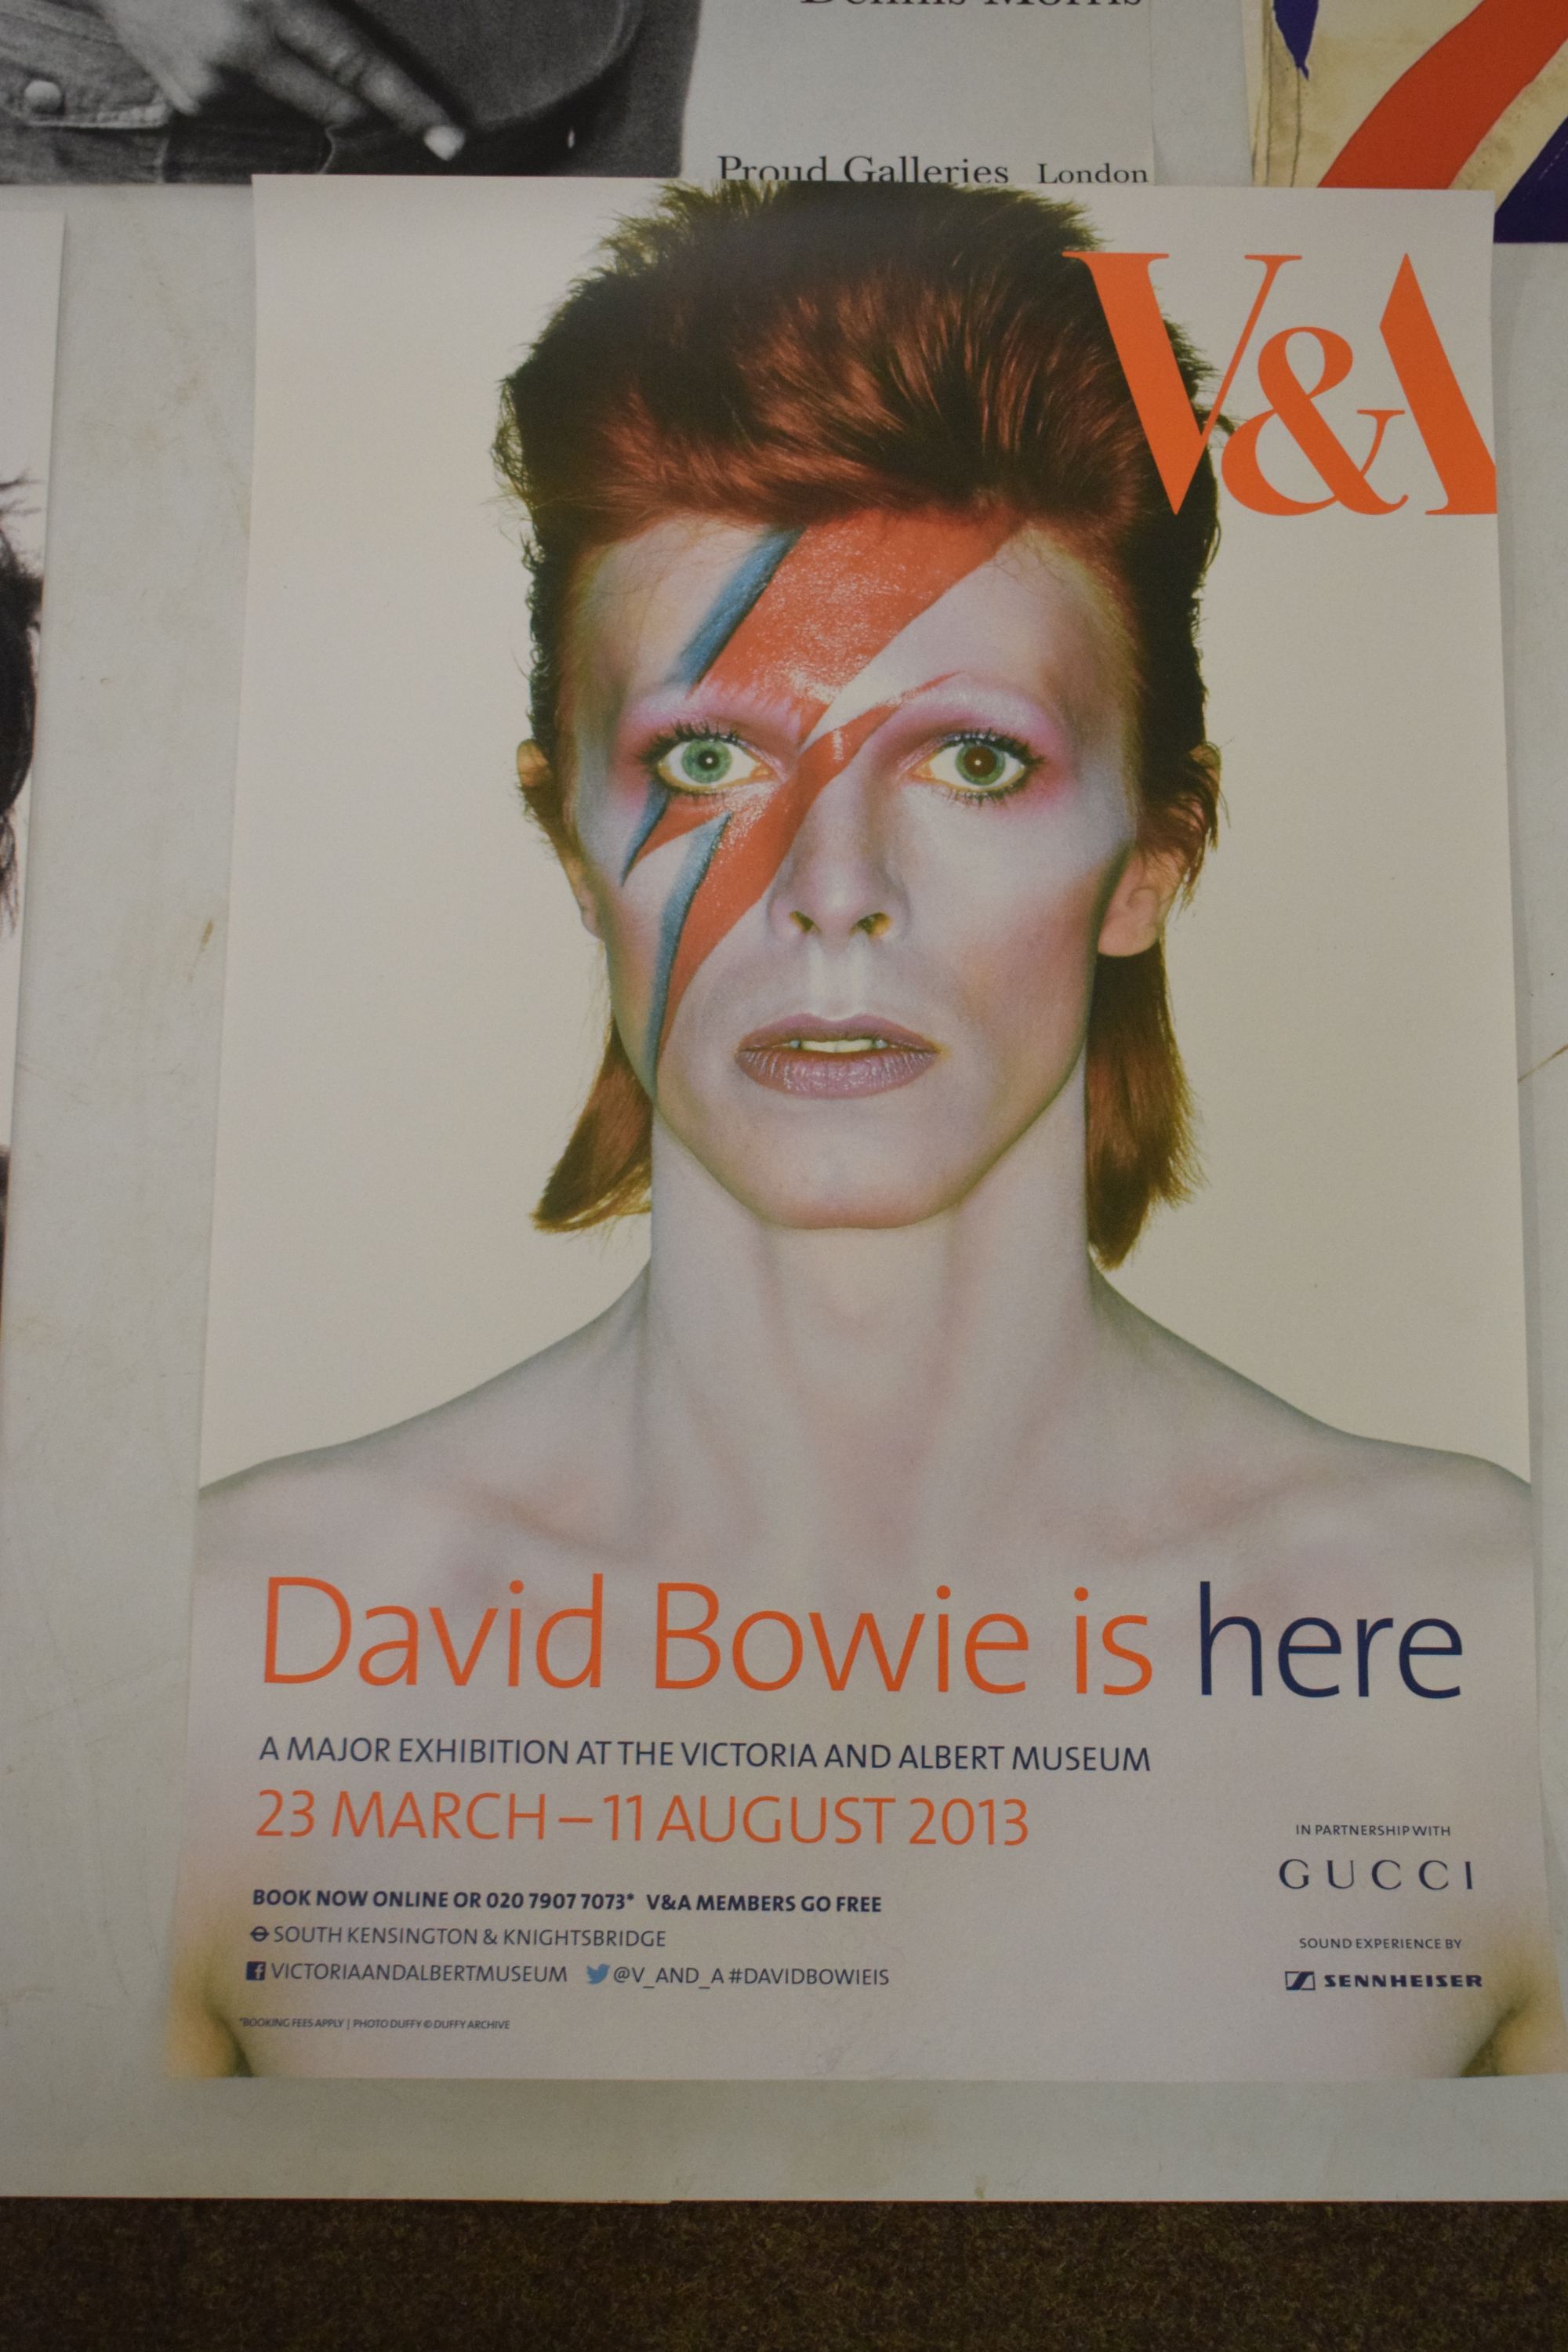 V&A MUSEUM David Bowie is here ポスター www.krzysztofbialy.com